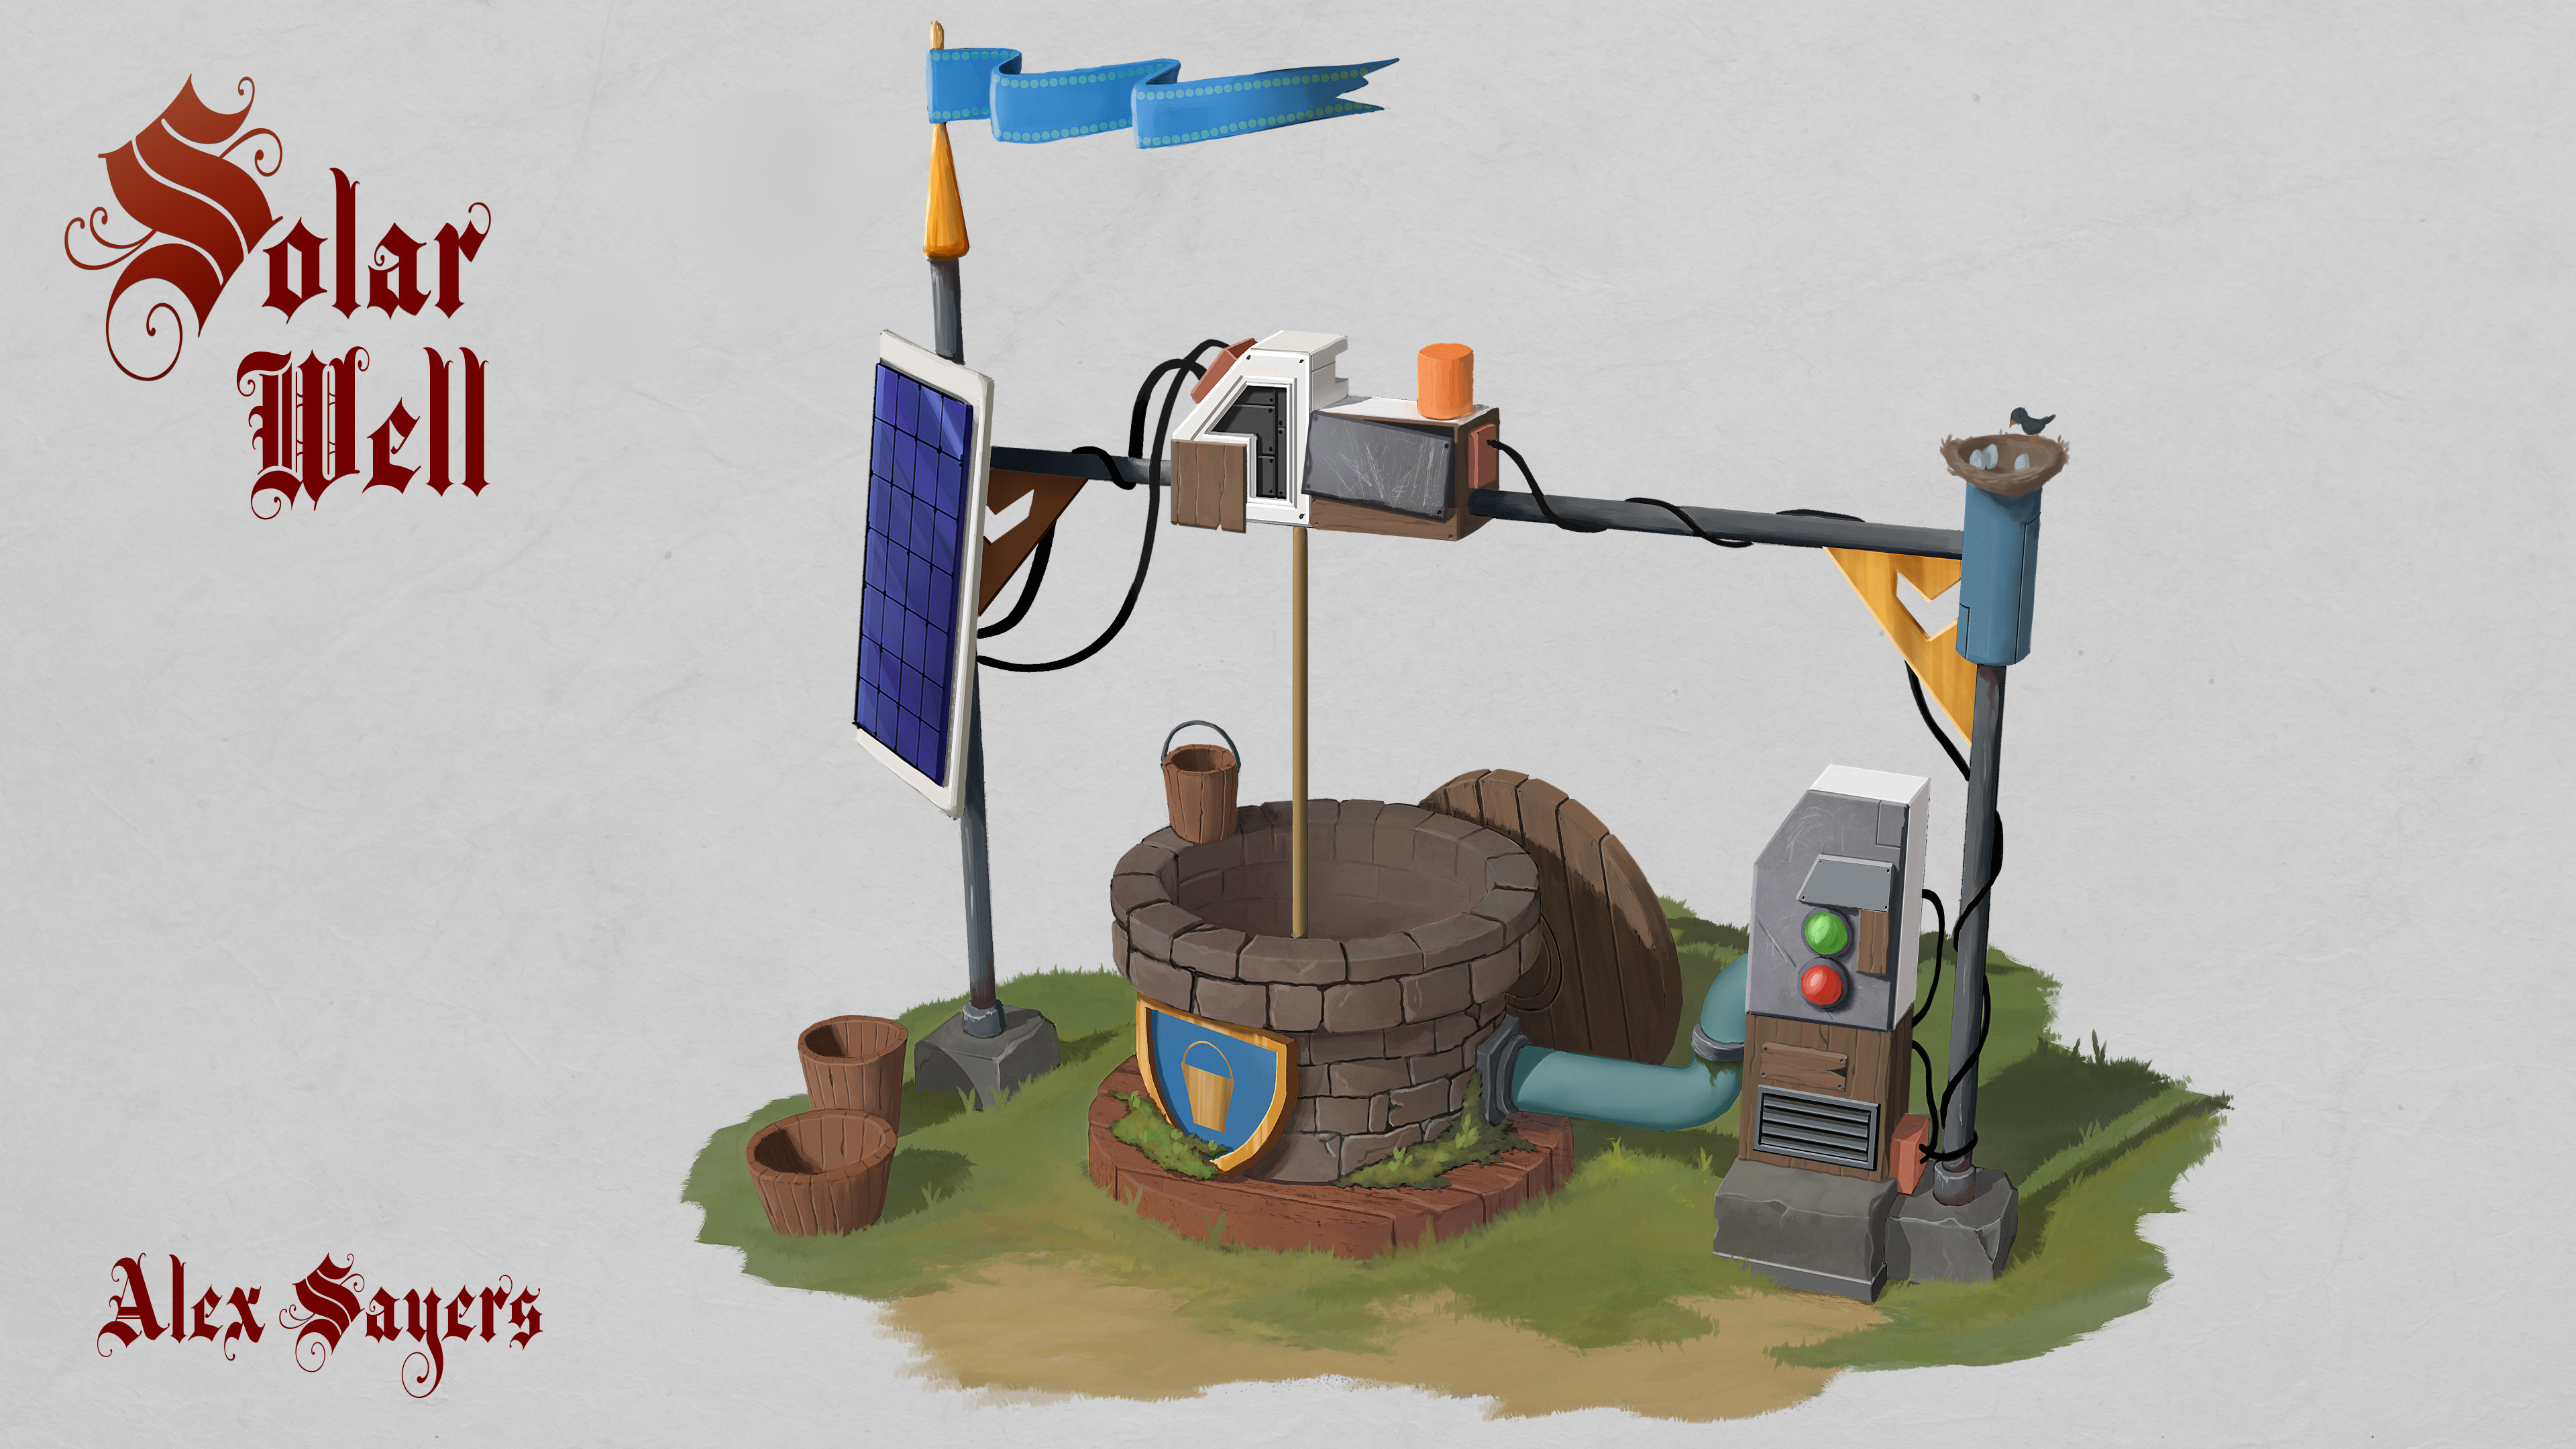 A solar-powered well takes all the hassle out of fetching water for the village.